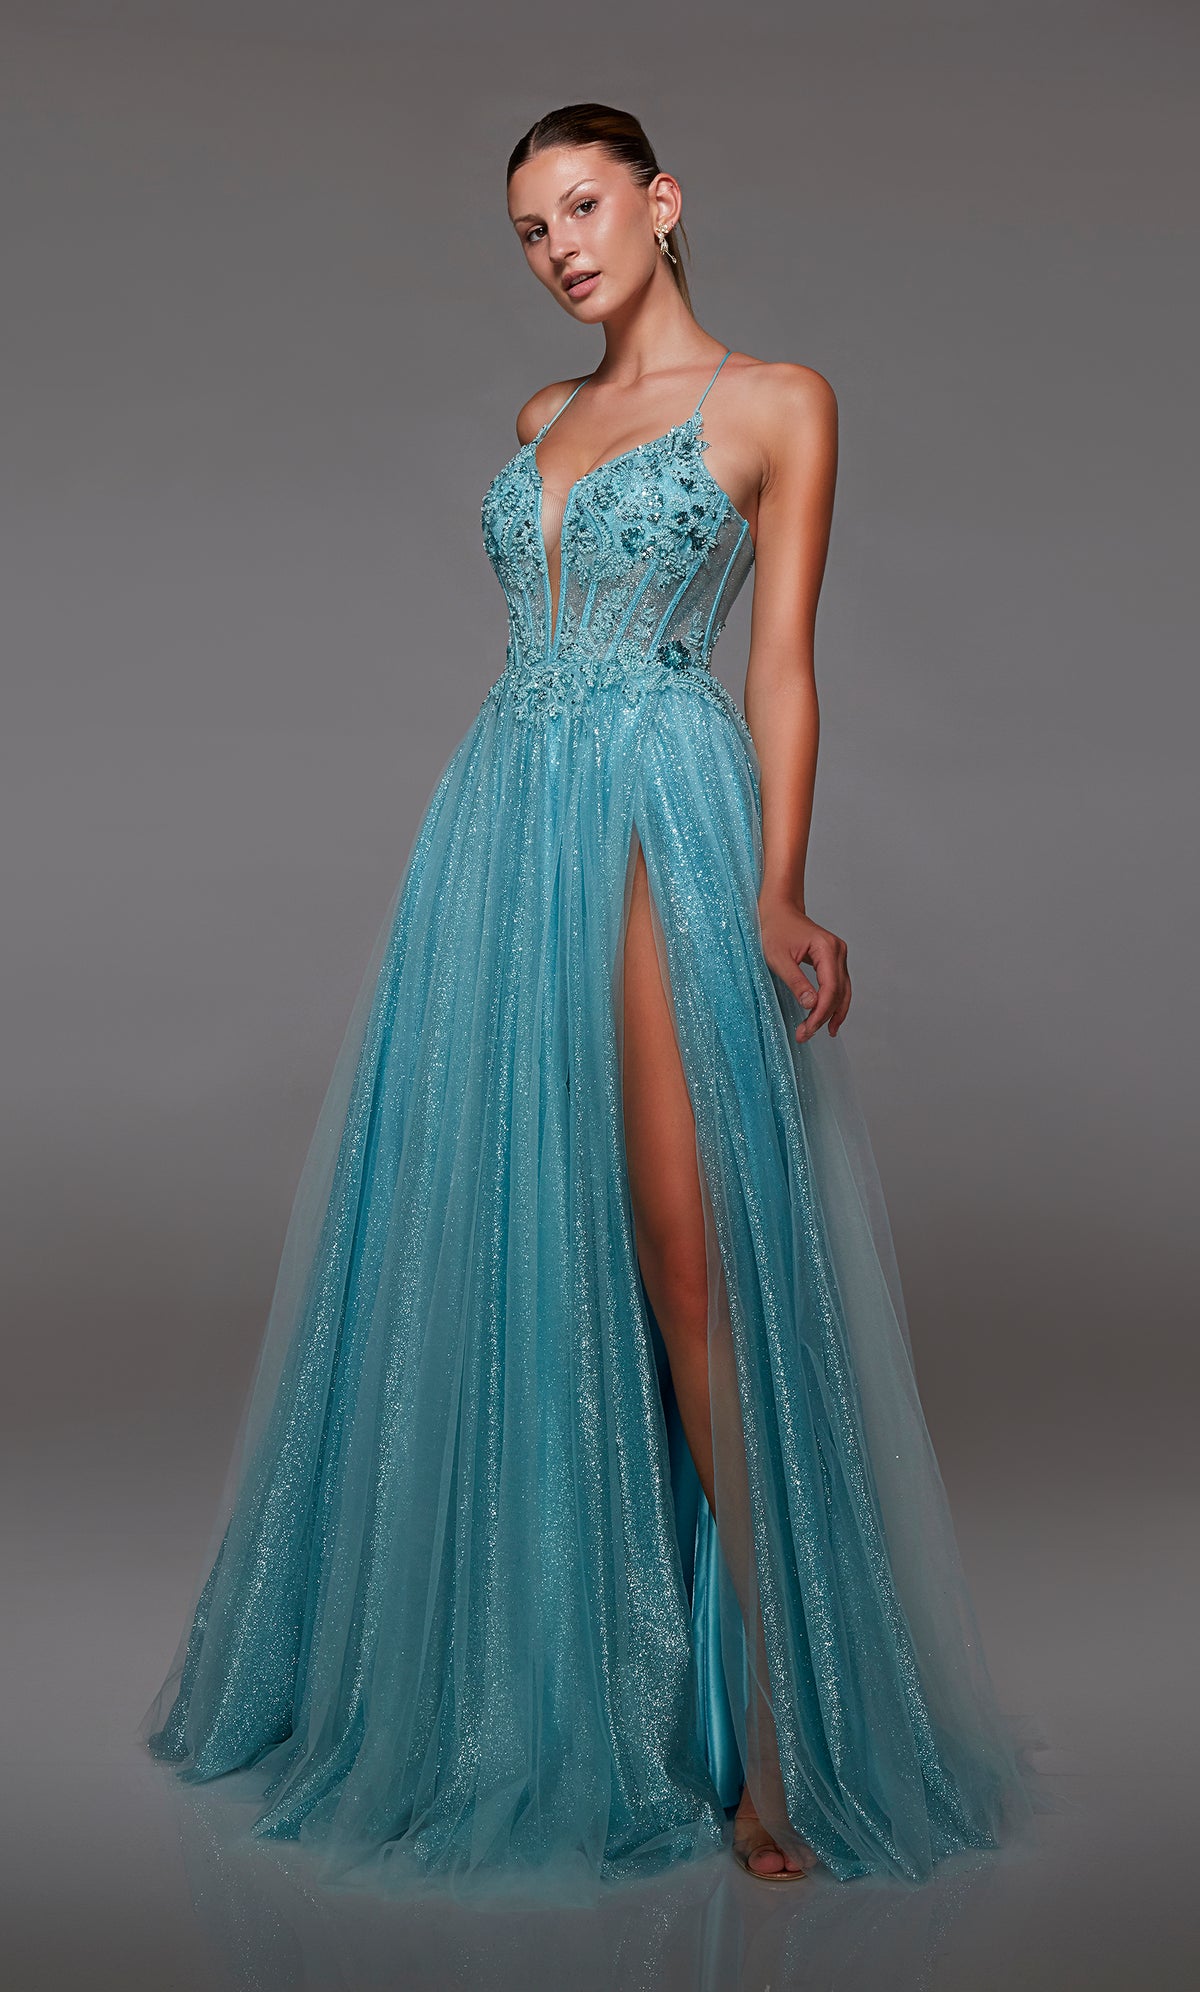 Aqua blue glitter tulle corset dress with sheer beaded lace bodice, high slit, lace-up back, and an touch of train for an dreamy and enchanting vibe.